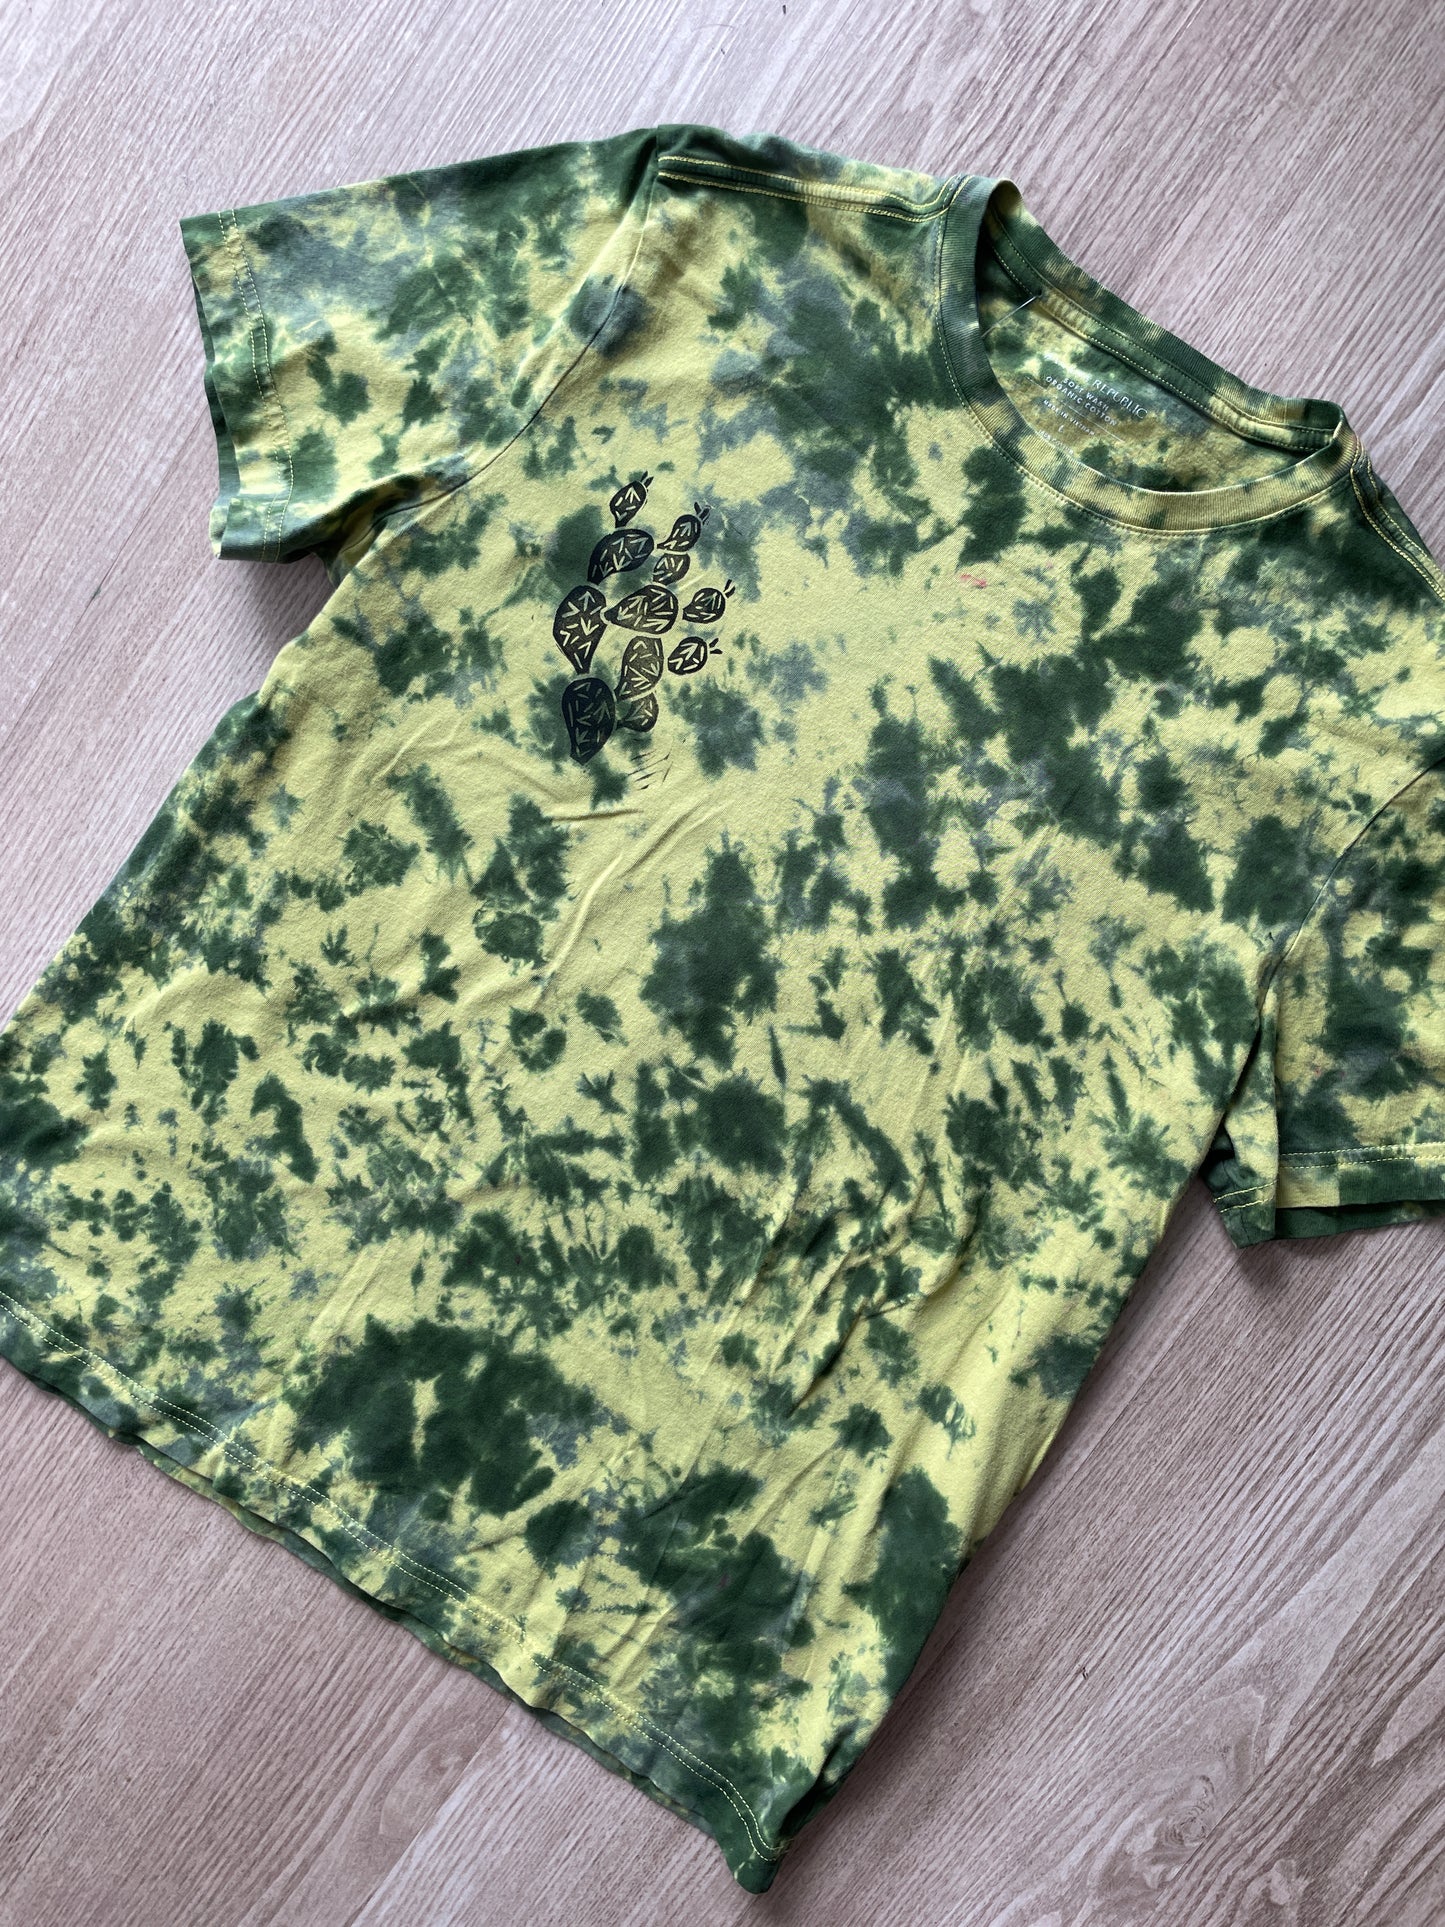 LARGE Men’s Prickly Pear Cactus Tie Dye T-Shirt | One-Of-a-Kind Yellow and Green Crumpled Short Sleeve